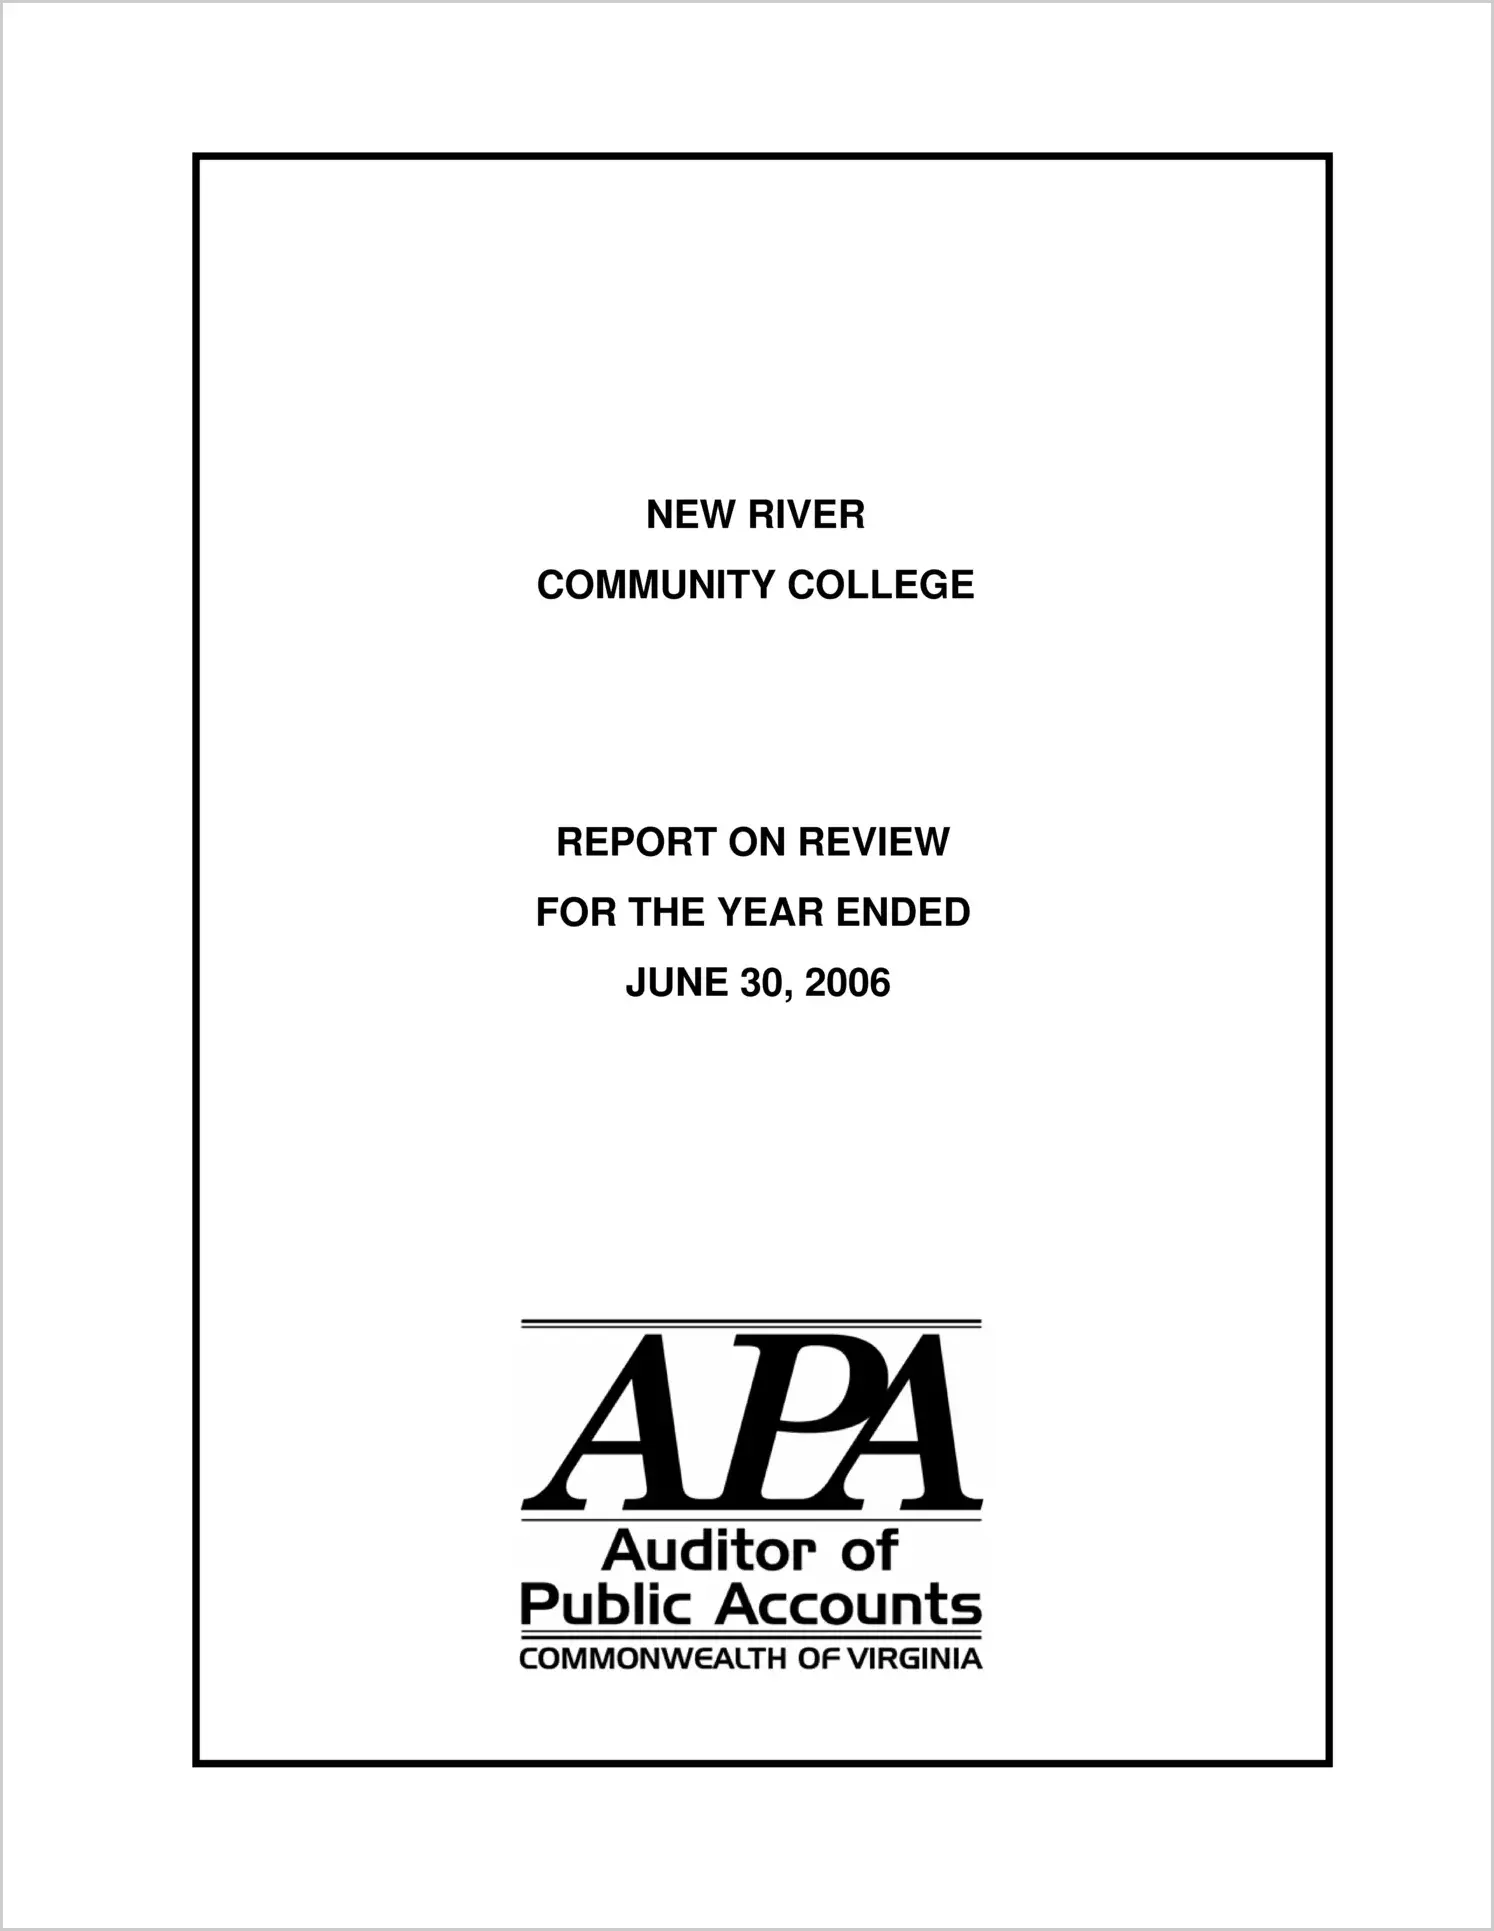 New River Community College Report on Review for the Year Ended June 30, 2006